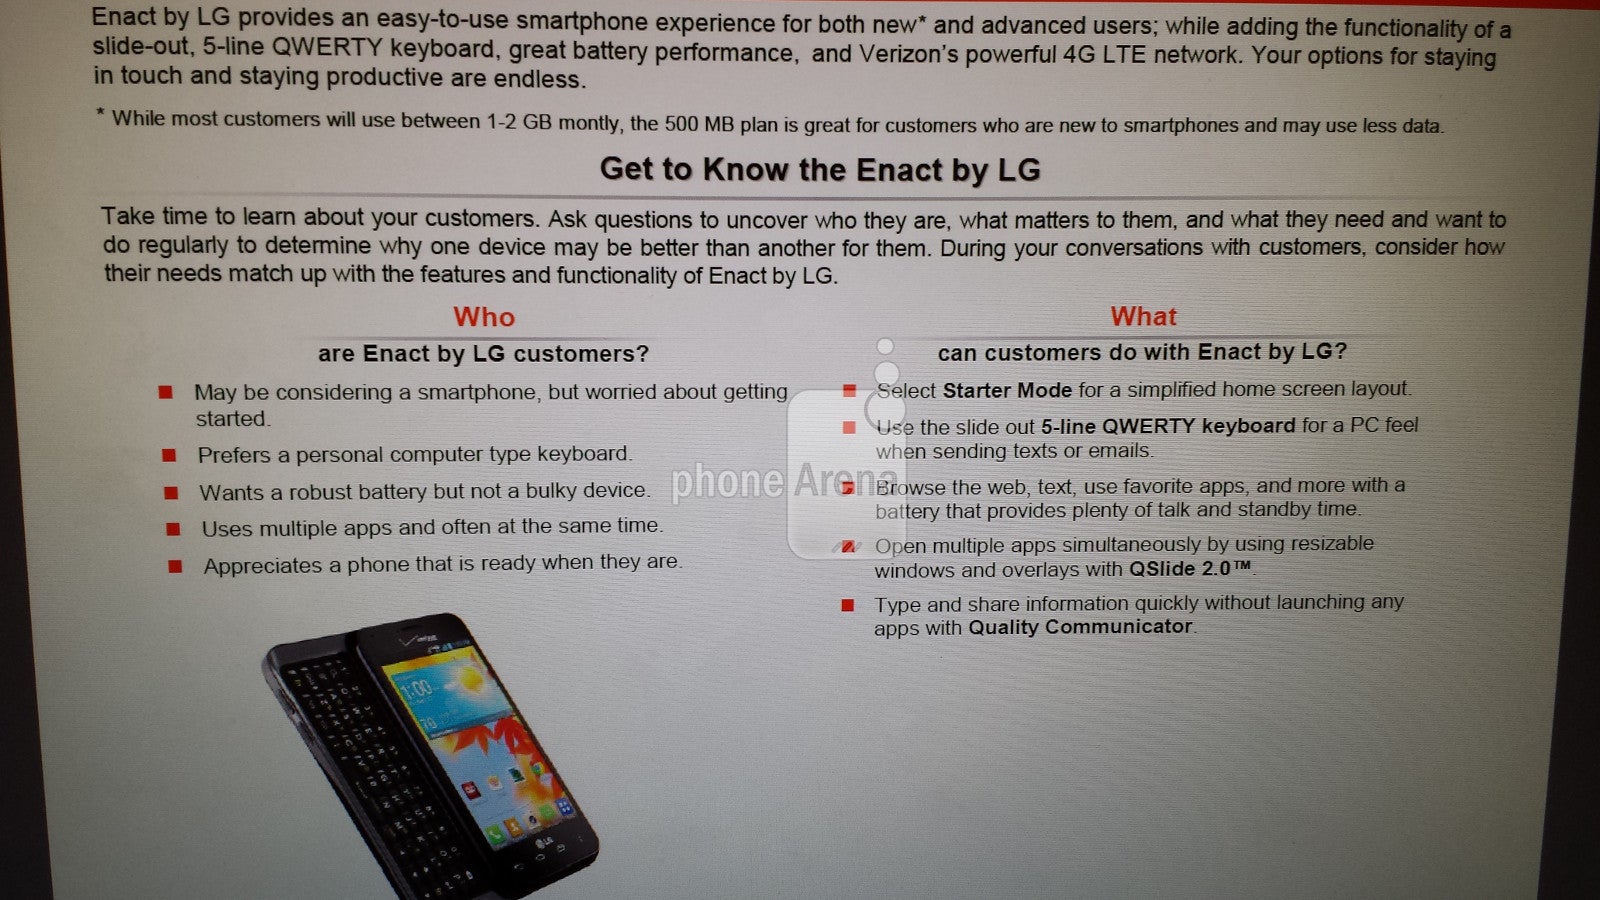 Leaked document about the VZW Enact by LG - LG Enact, LG Exalt, Kyocera Hydro Elite and Samsung Convoy 3 to arrive at Verizon by September 15